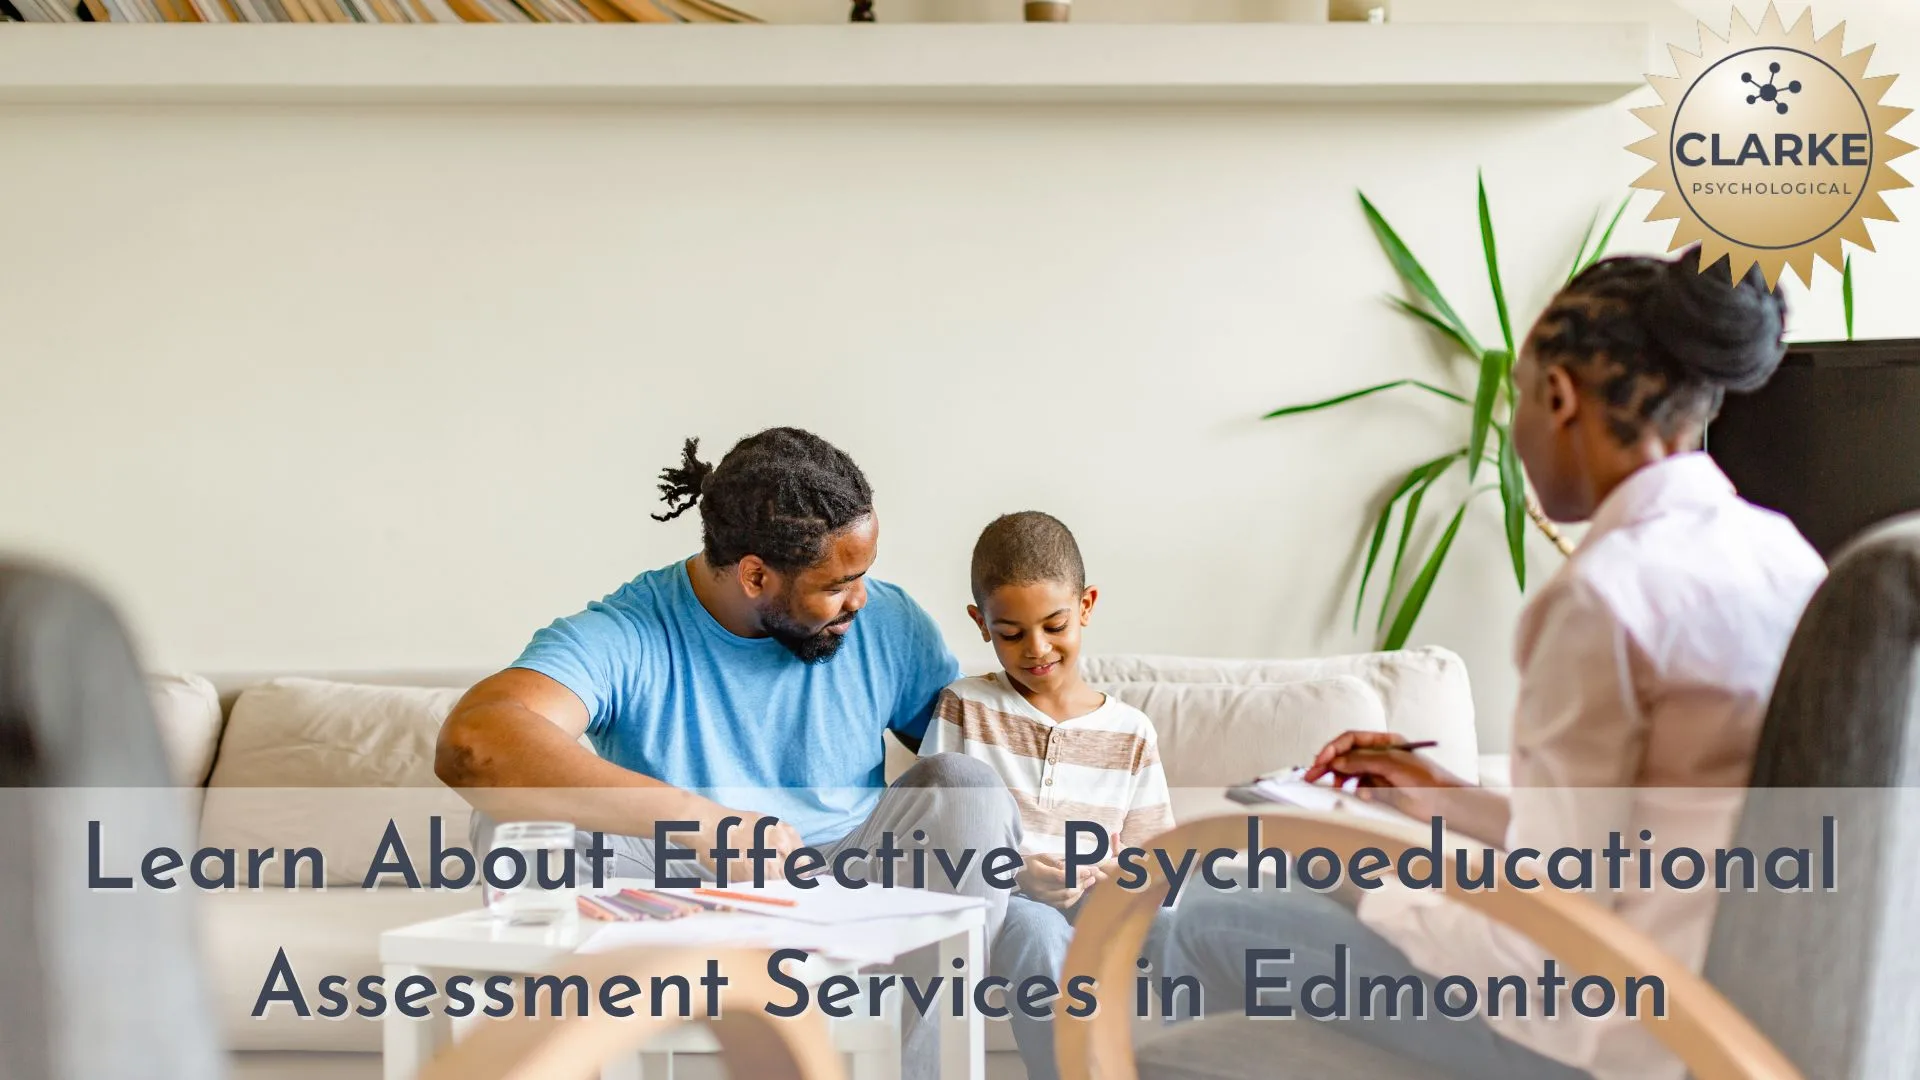 Learn About Effective Psychoeducational Assessment Services in Edmonton